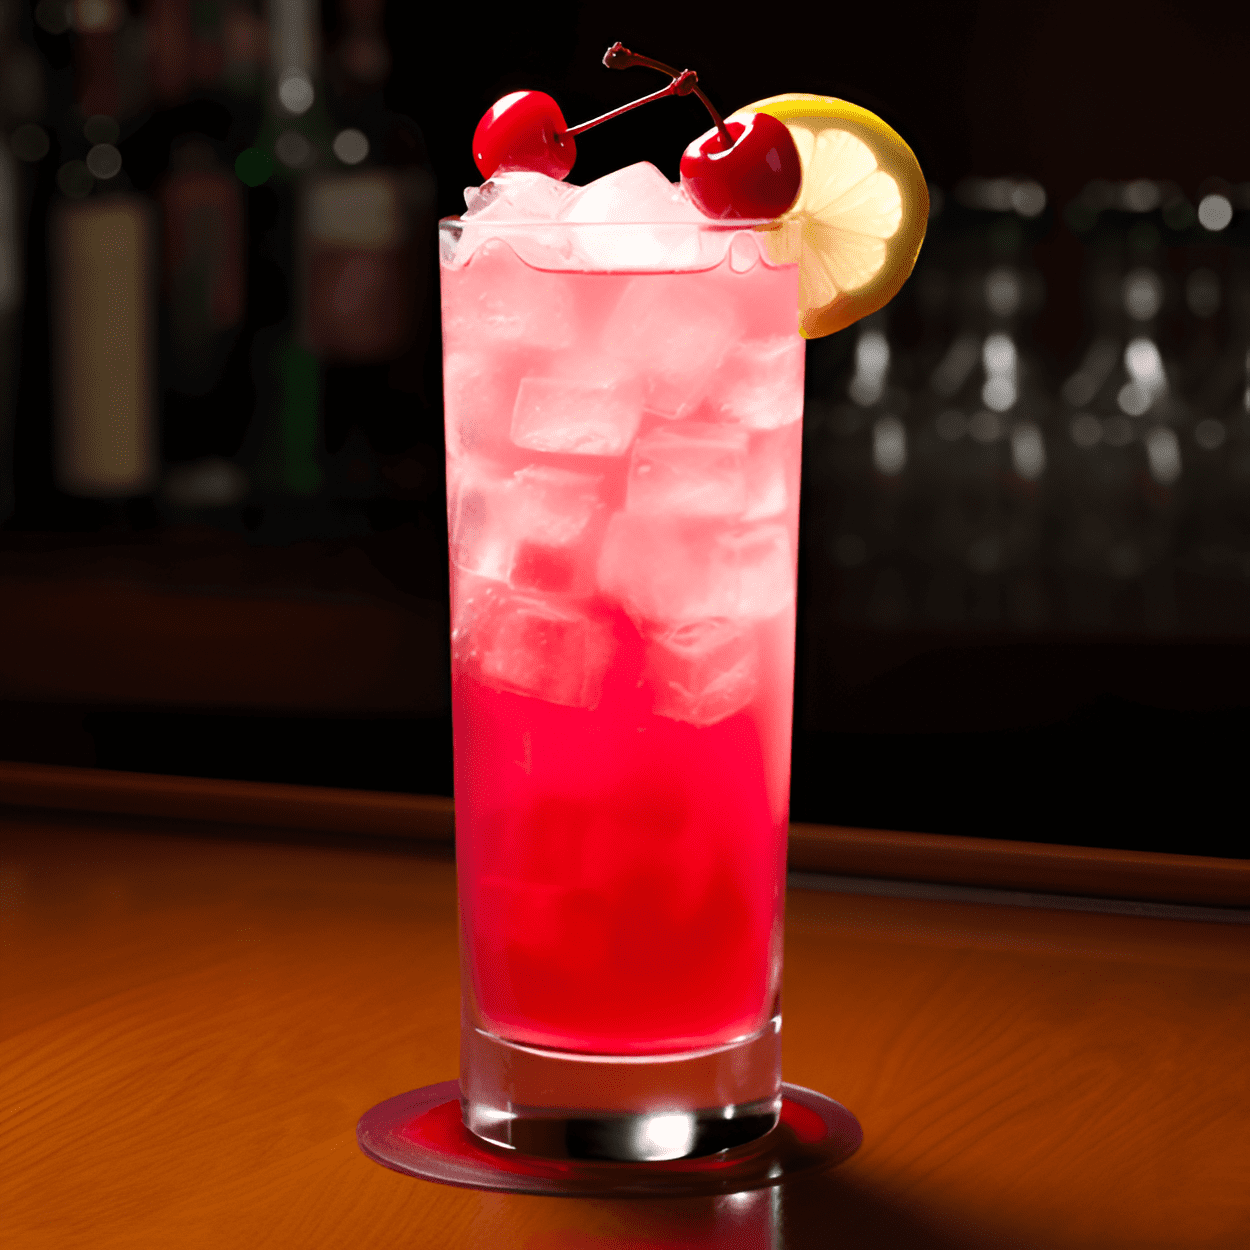 Bubble Gum Cocktail Recipe - The Bubble Gum cocktail is sweet, fruity, and a little bit creamy. It has a distinctive bubble gum flavor that's balanced by the tangy citrus notes from the lemon juice. The cream soda adds a smooth, velvety texture that makes the drink feel indulgent.